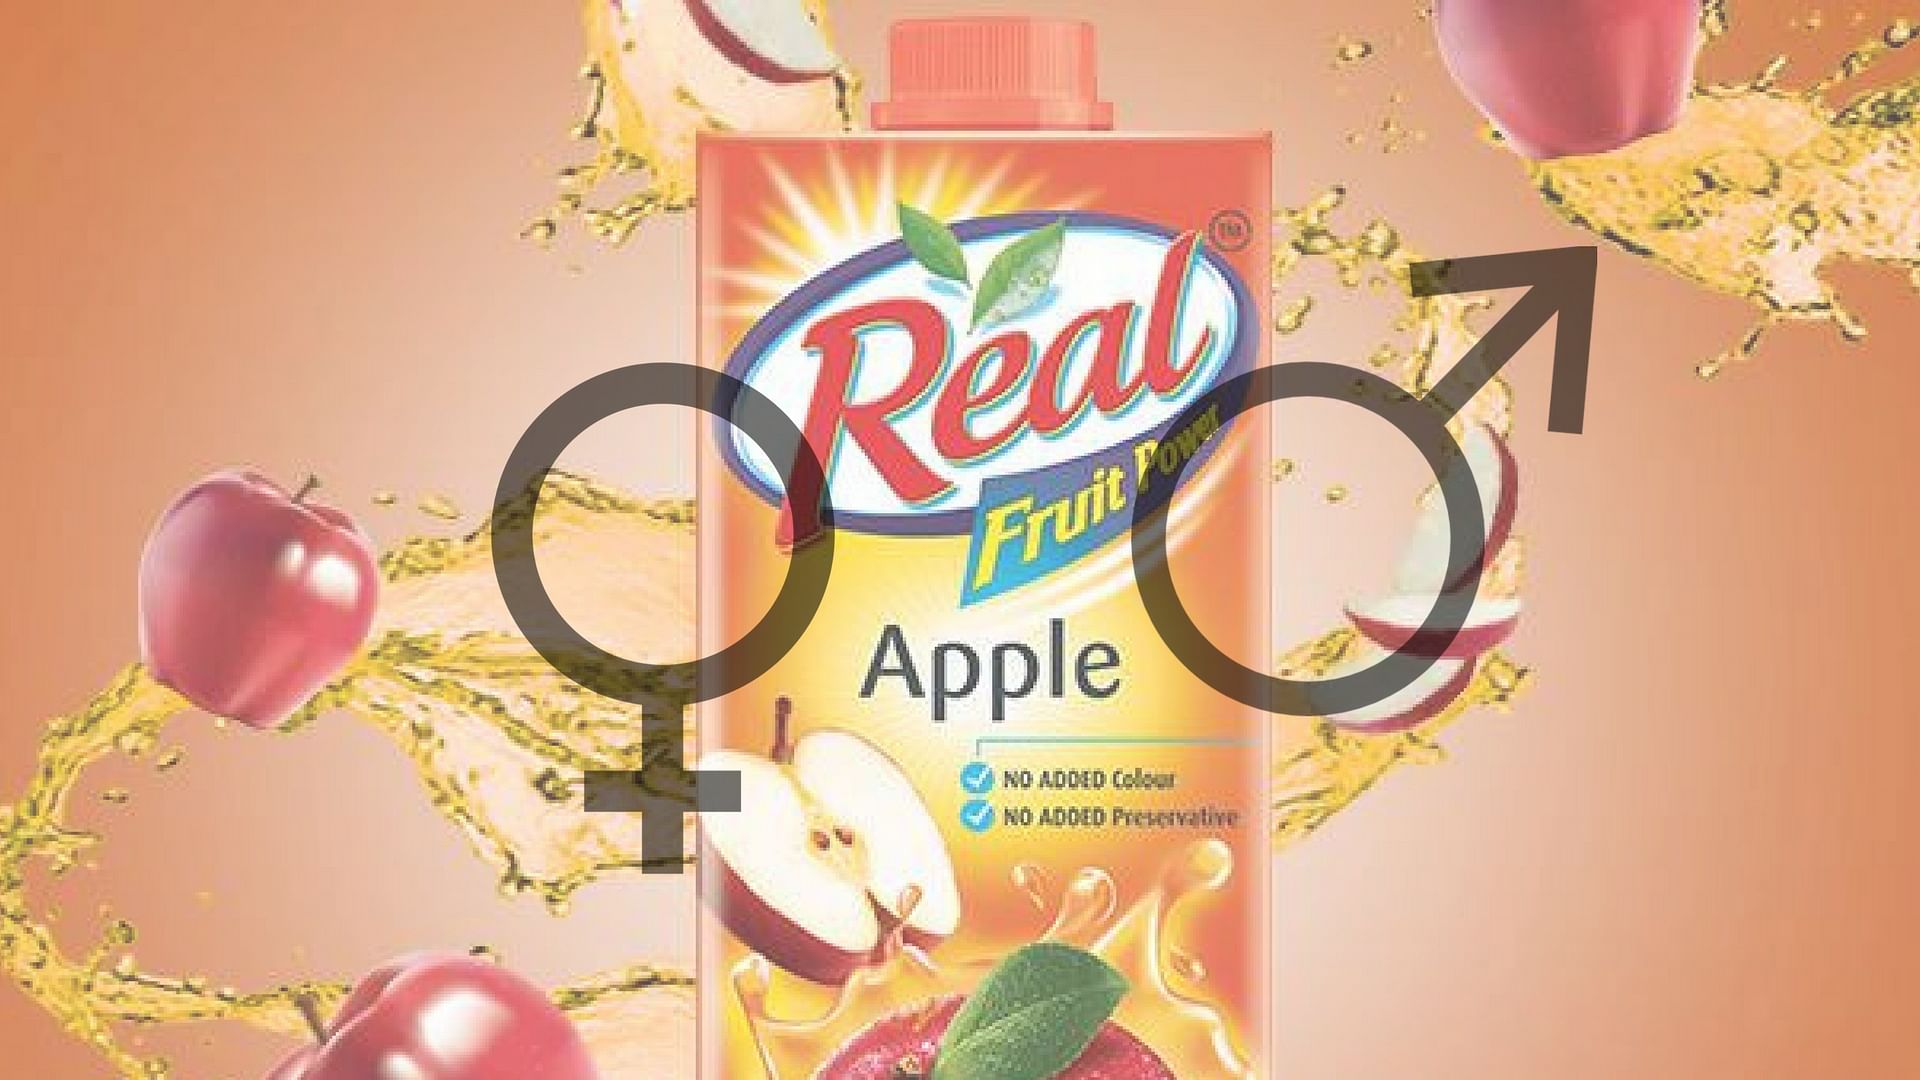 Réal Juice’s packaging raises a fresh question about gender in advertising (Photo: Facebook: <a href="https://www.facebook.com/RealFruitPower/photos/a.155906814535696.31376.116641471795564/901793566613680/?type=3&amp;theater">Real Fruit Juice</a>/<b>Altered by the Quint</b>) 